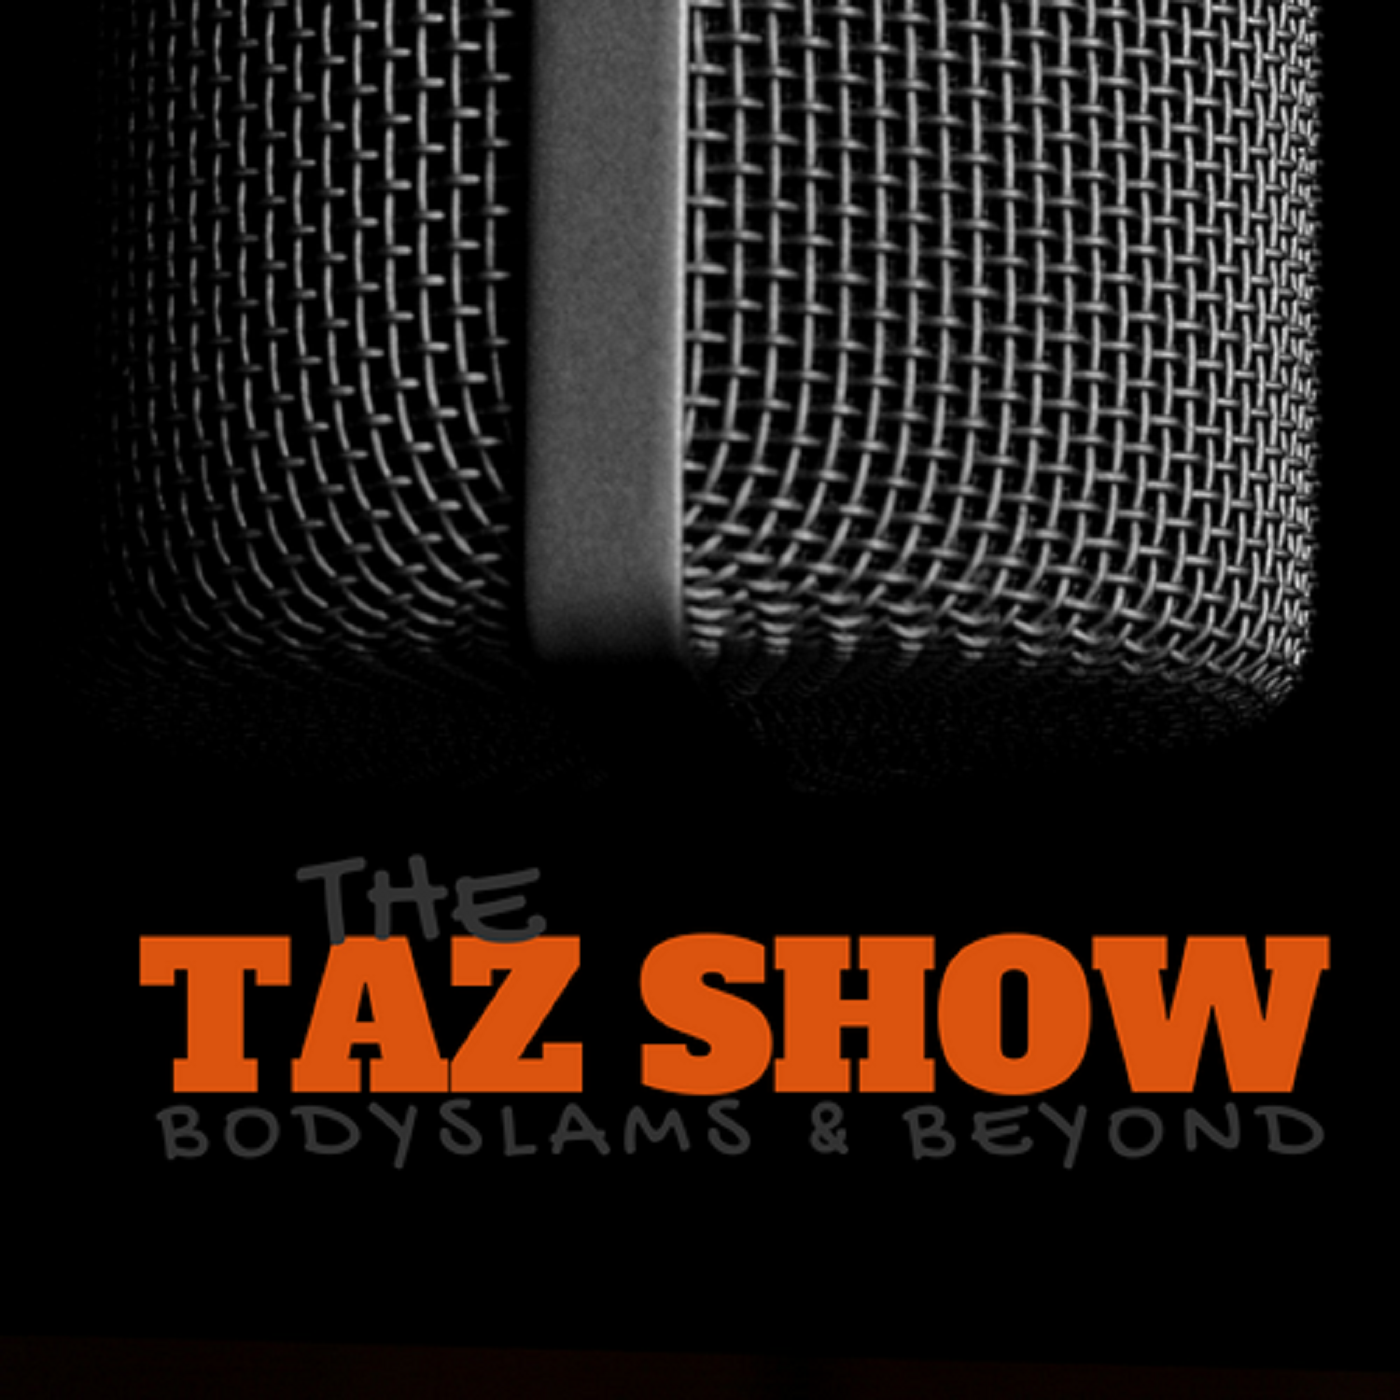 St. Patrick's Day on The Taz Show!